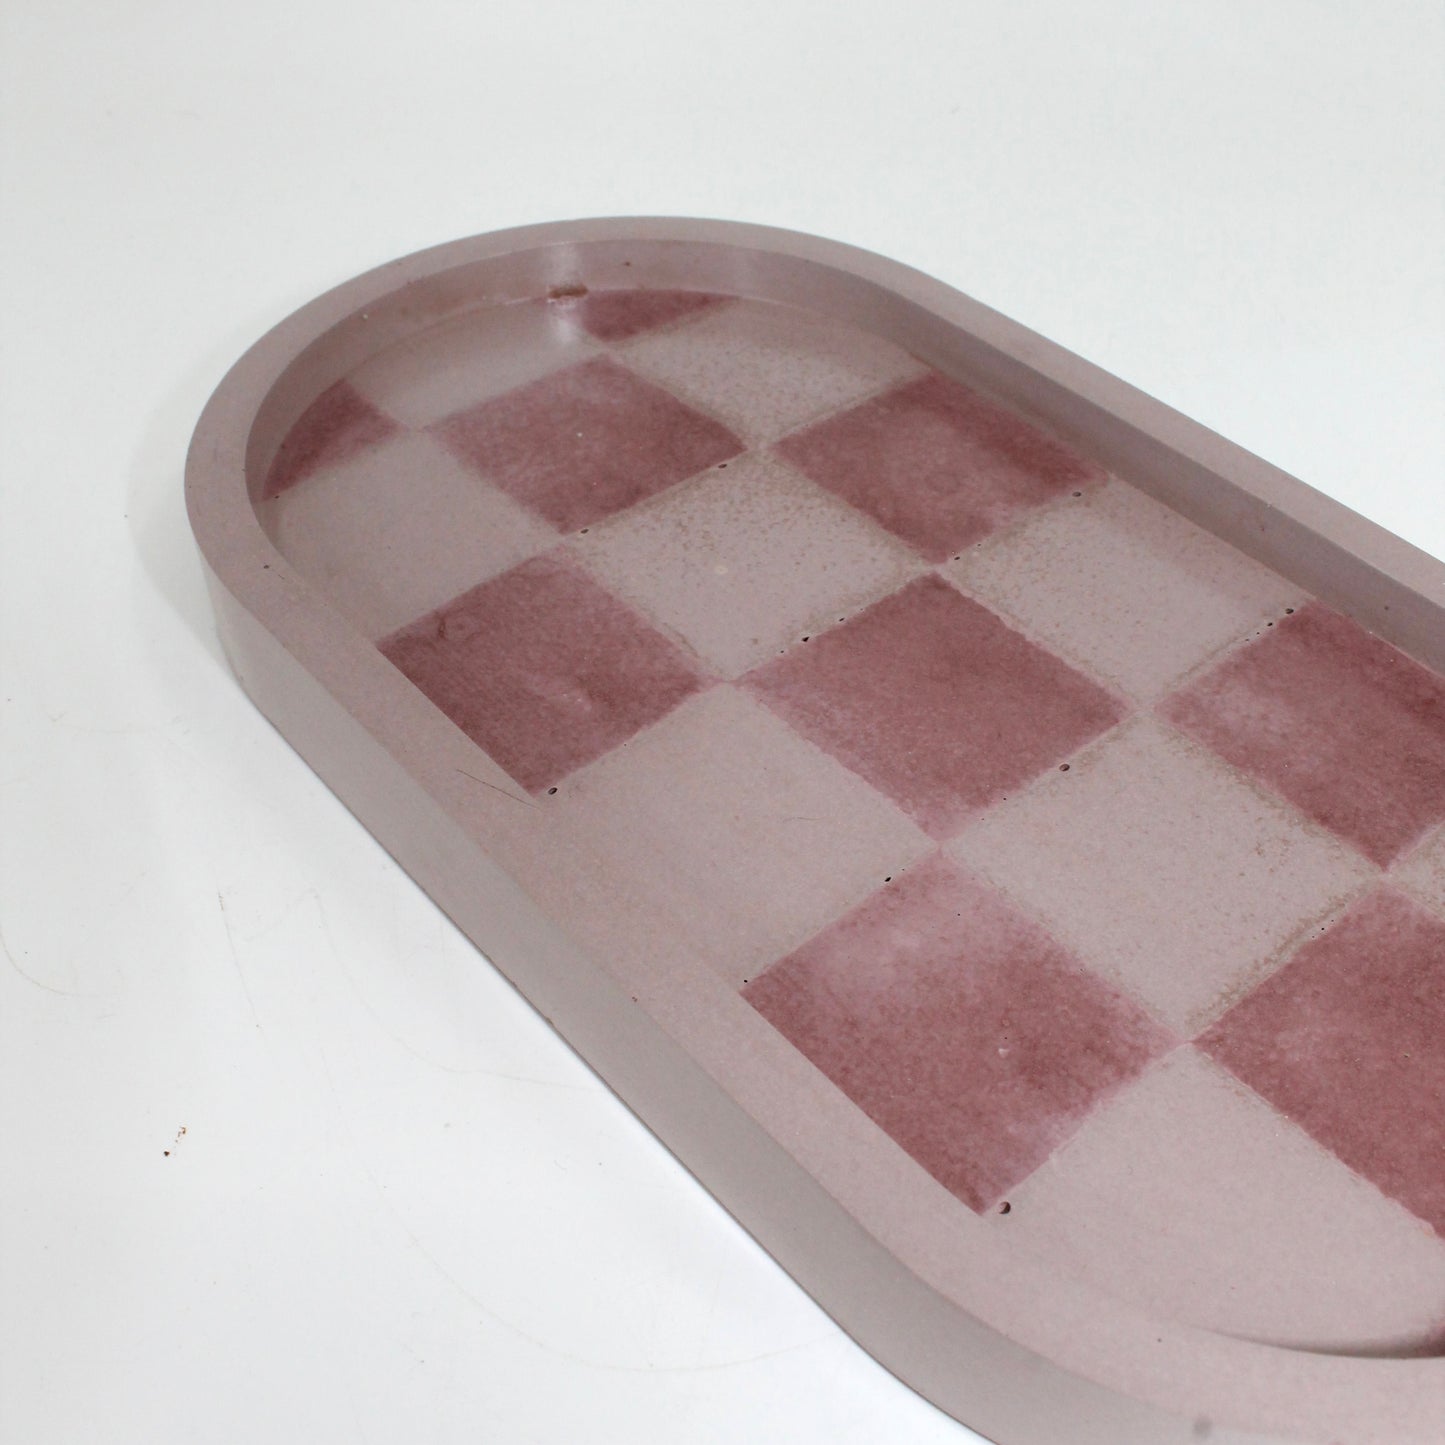 Checkered Favorite Oval Tray